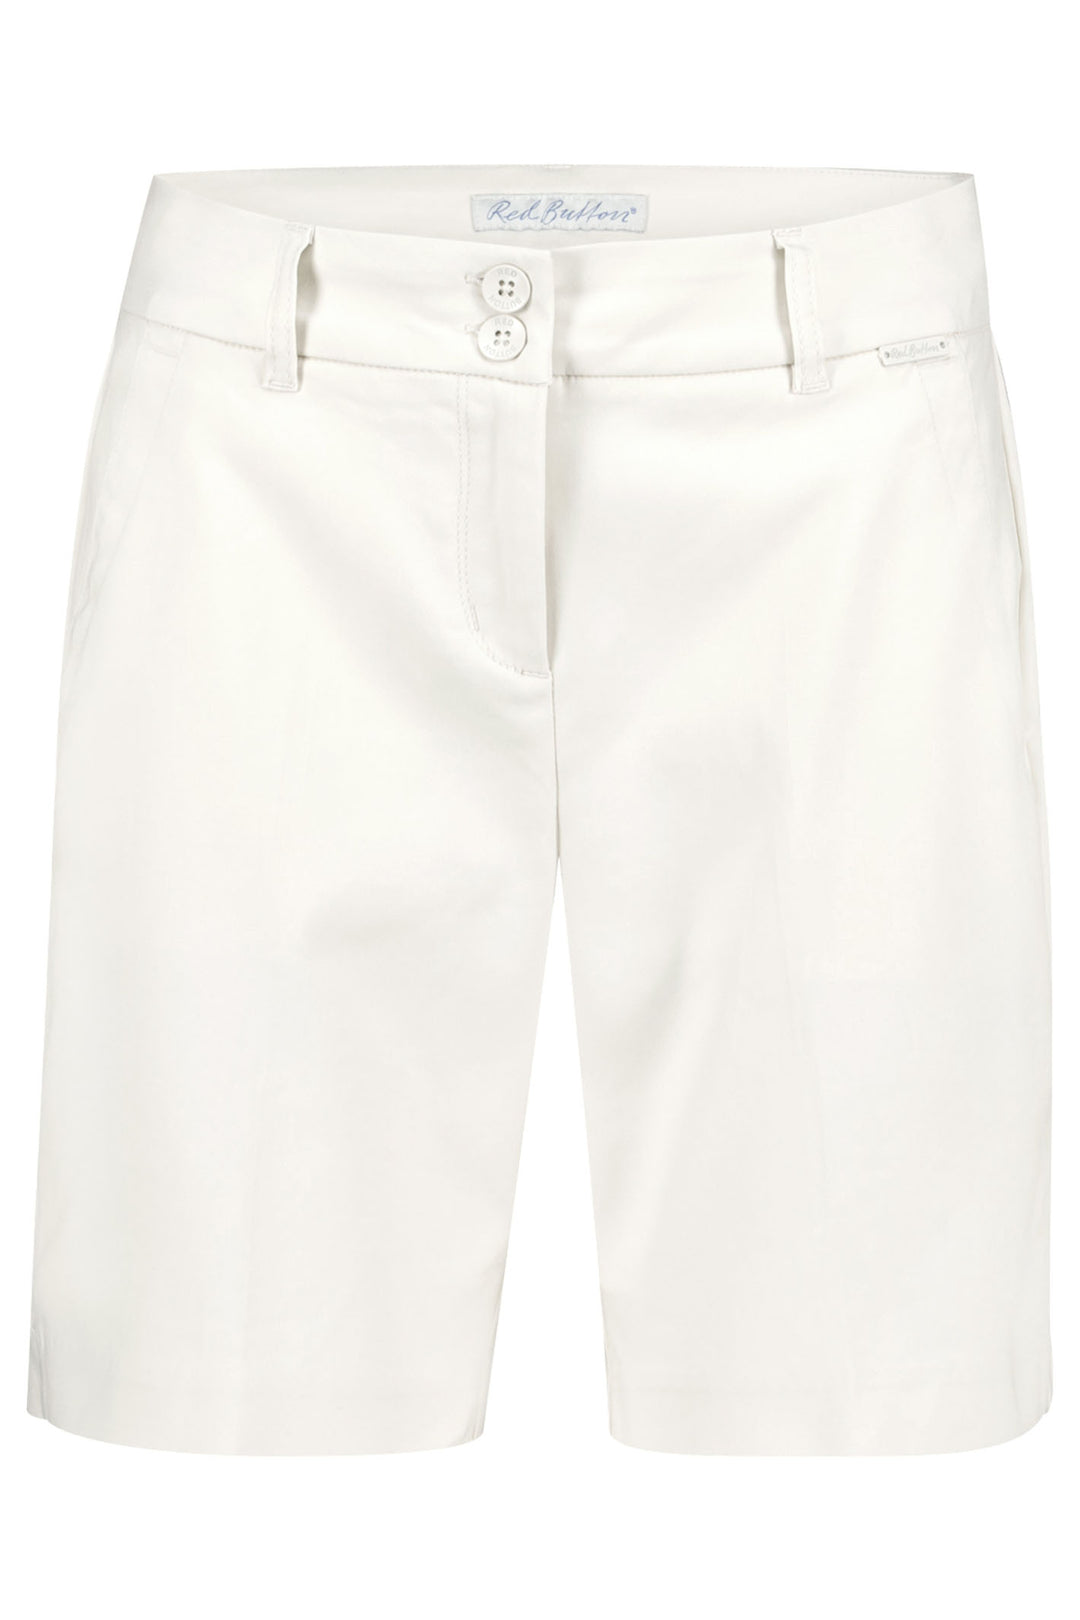 Red Button SRB4176 Ava Off White Smart Shorts - Dotique